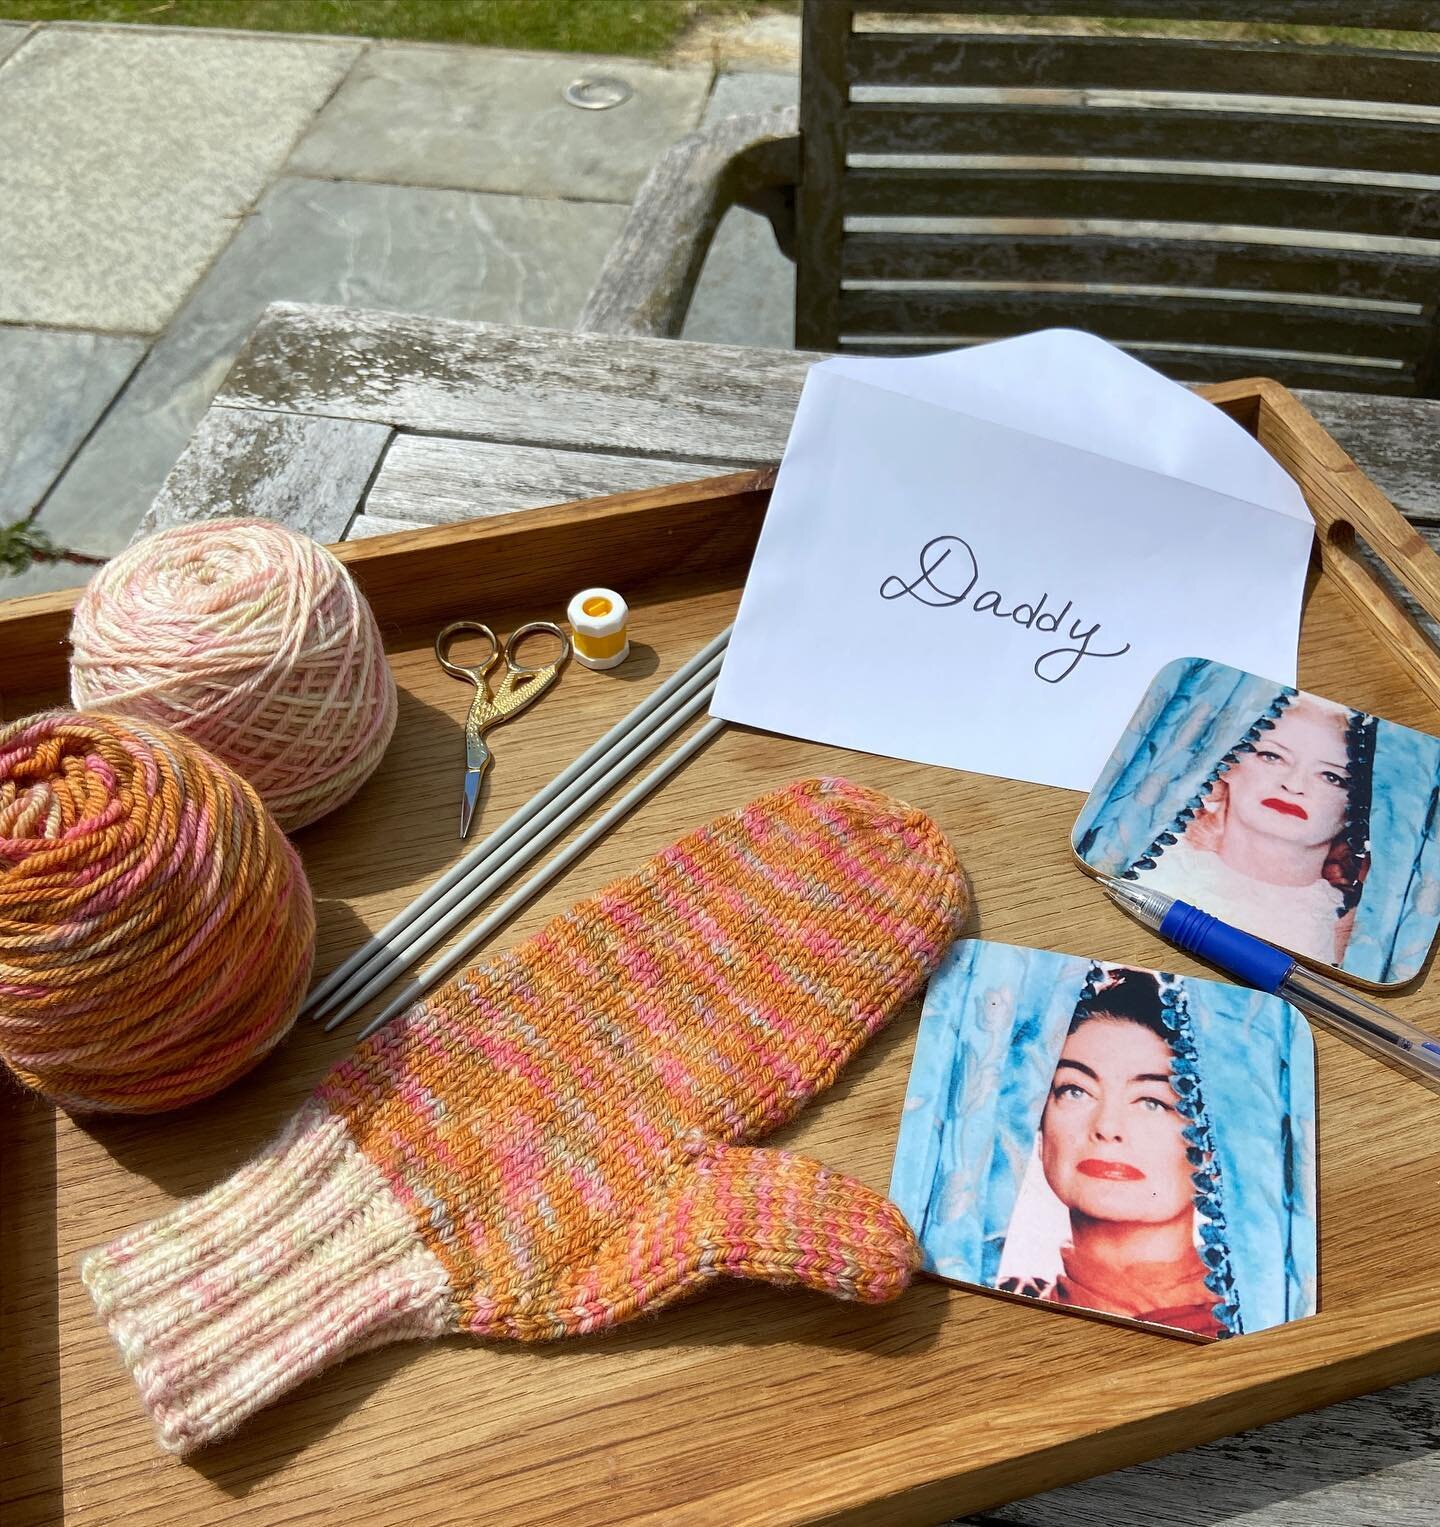 Before I begin my second mitten in Sotto Voce and Nicola, there&rsquo;s a letter I need to write. Channelling the greats Bette and Joan today. #yarnstore #gayknitting #gay #bettedavis #joancrawford #yarn #knittersofinstagram #knitting #mittens #handm